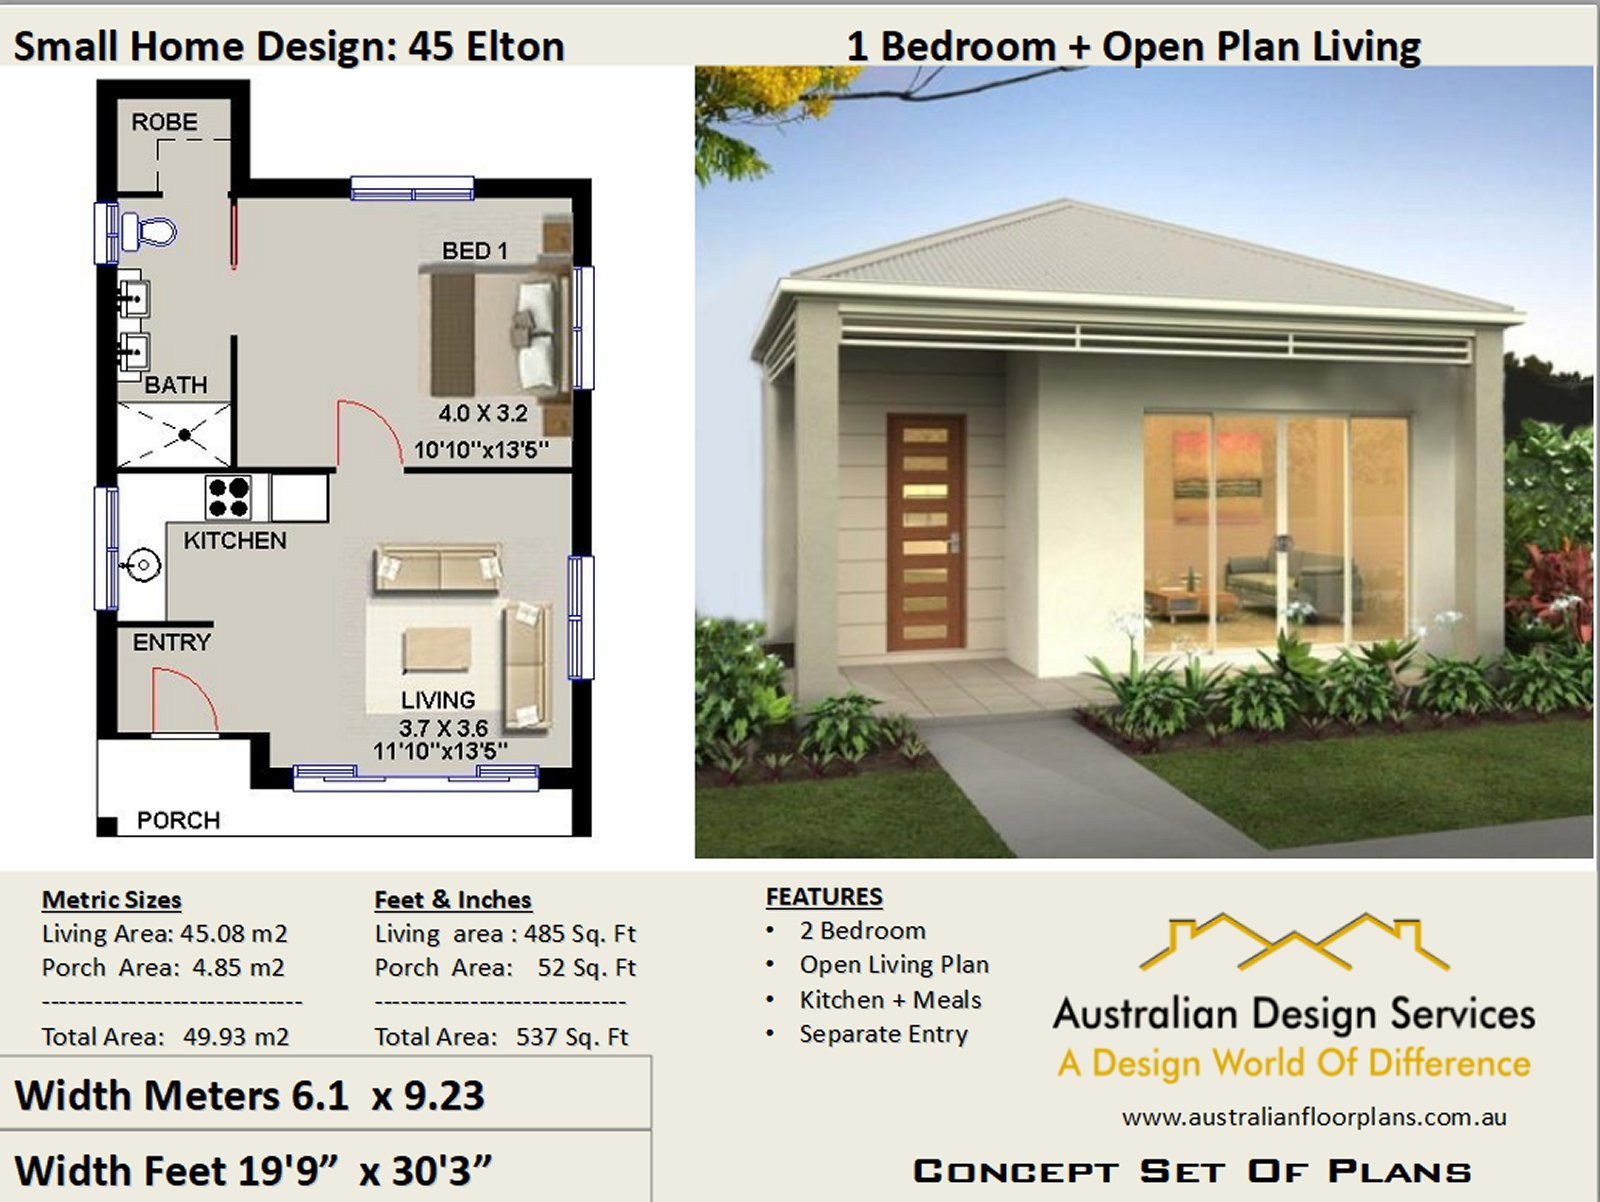 Small One Bedroom House
 Small House Plan 45 Elton 537 Sq Foot 45 93 m2 1 Bedroom